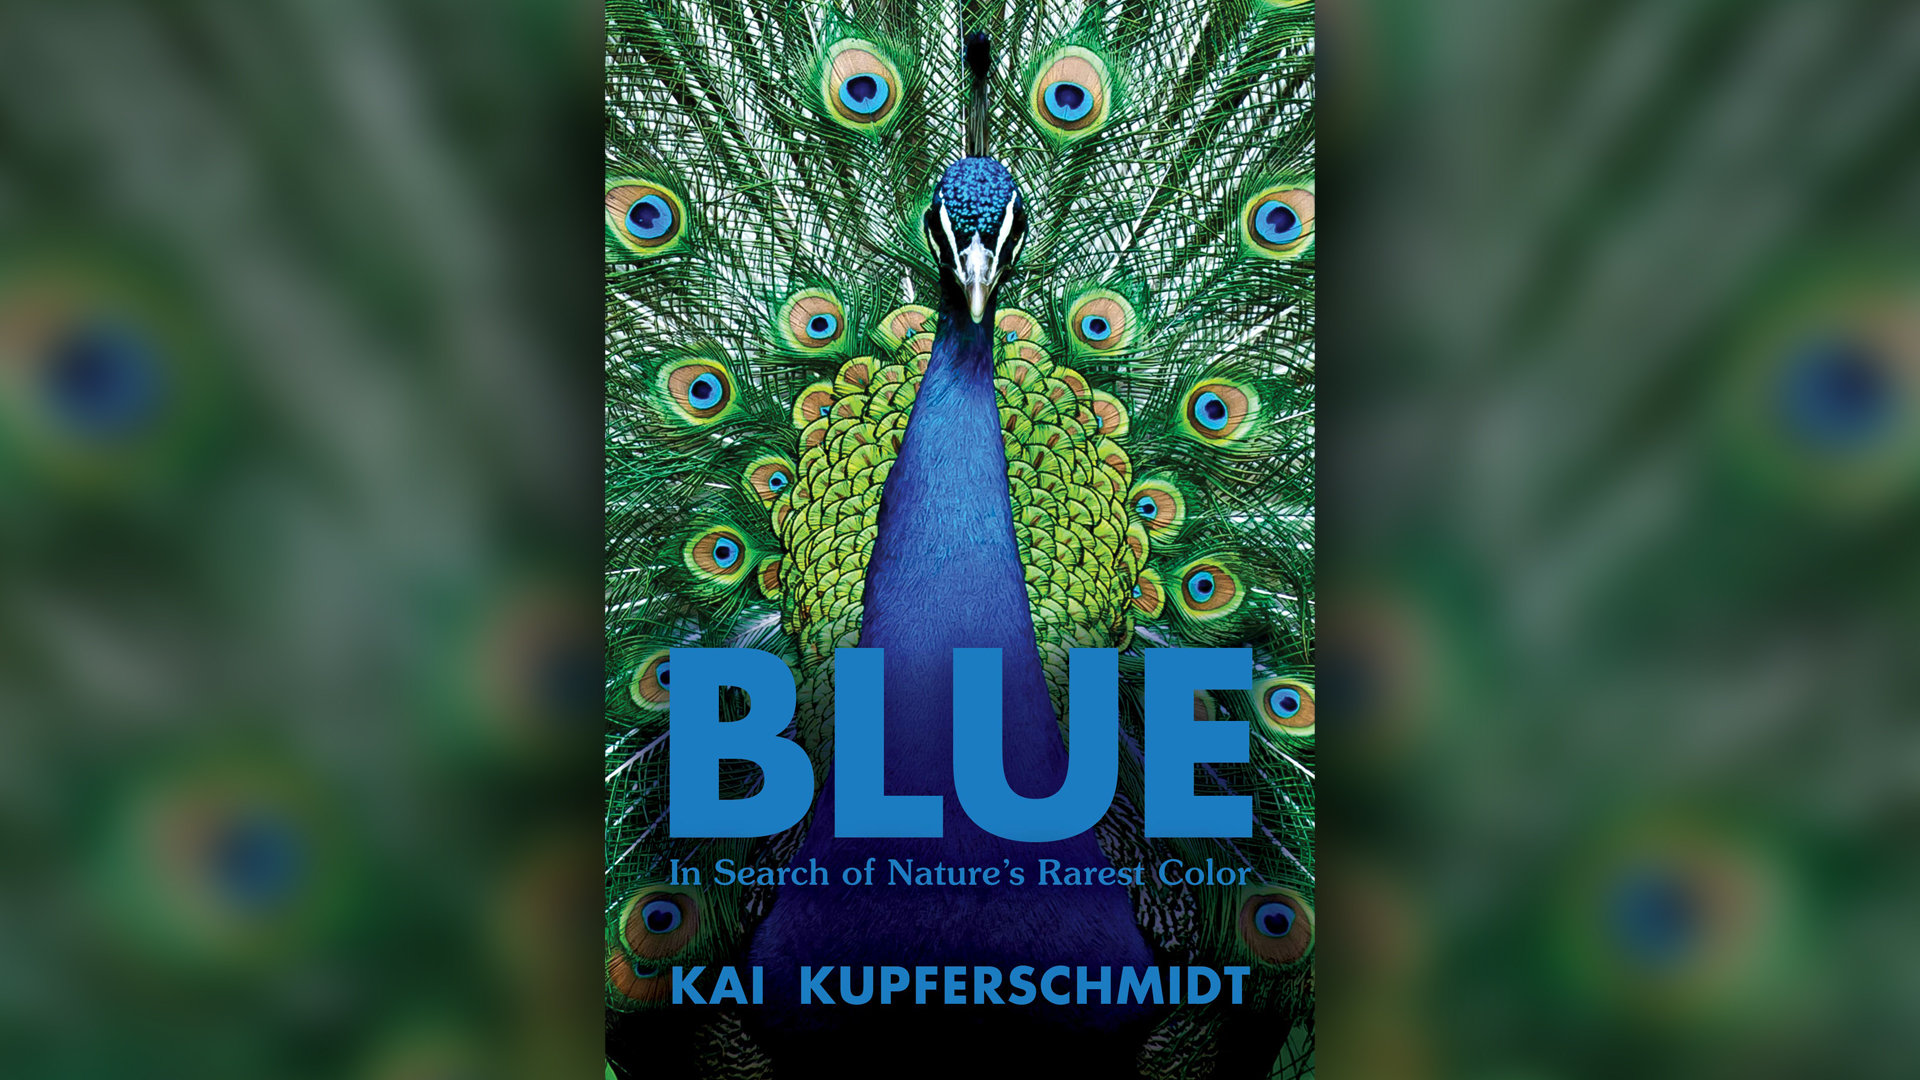 In the book "Blue," writer Kai Kupferschmidt explores the science behind this elusive color.